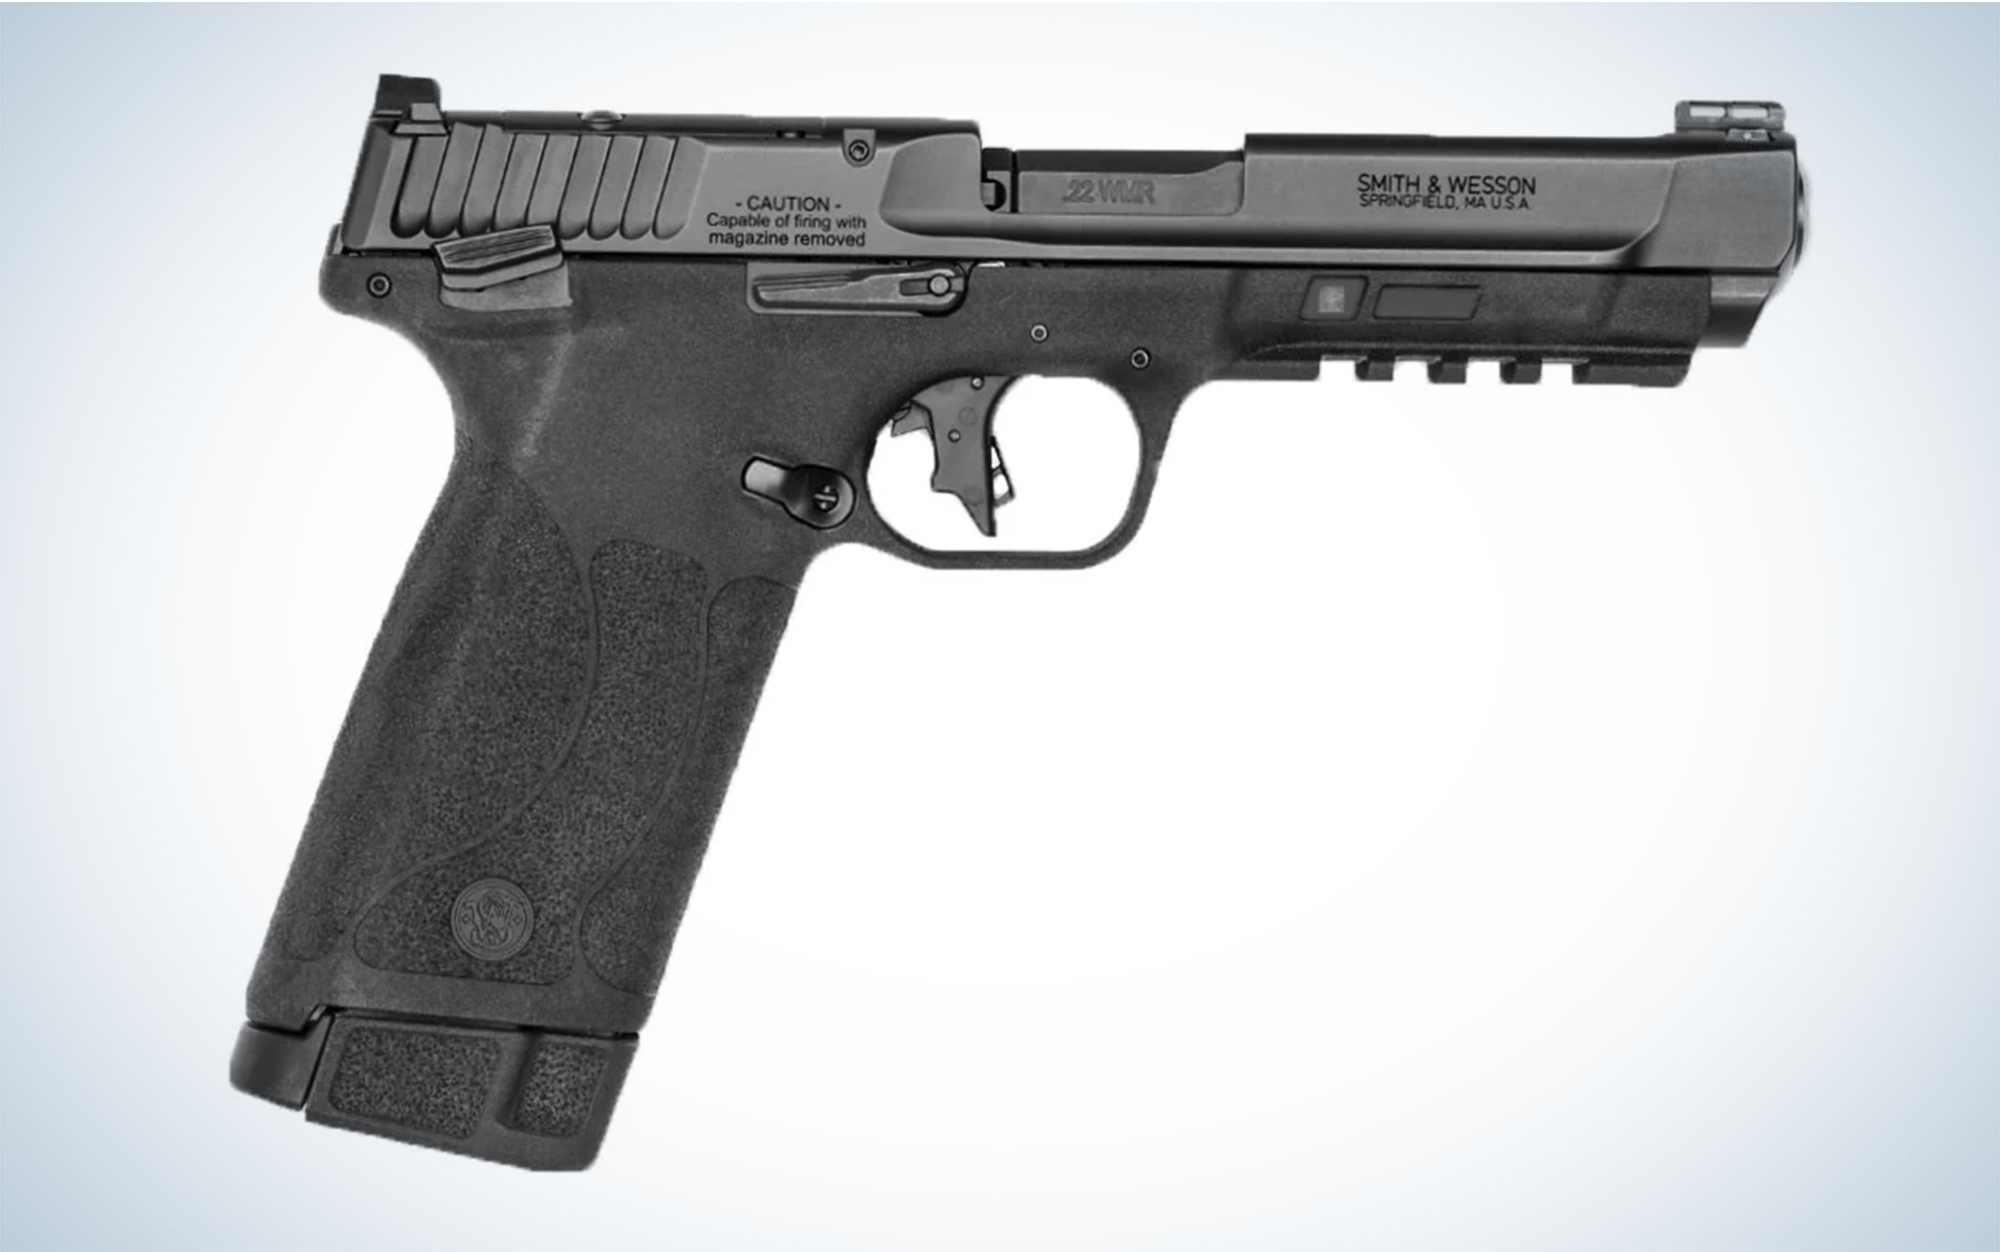 We reviewed the Smith & Wesson M&P 22 Magnum.